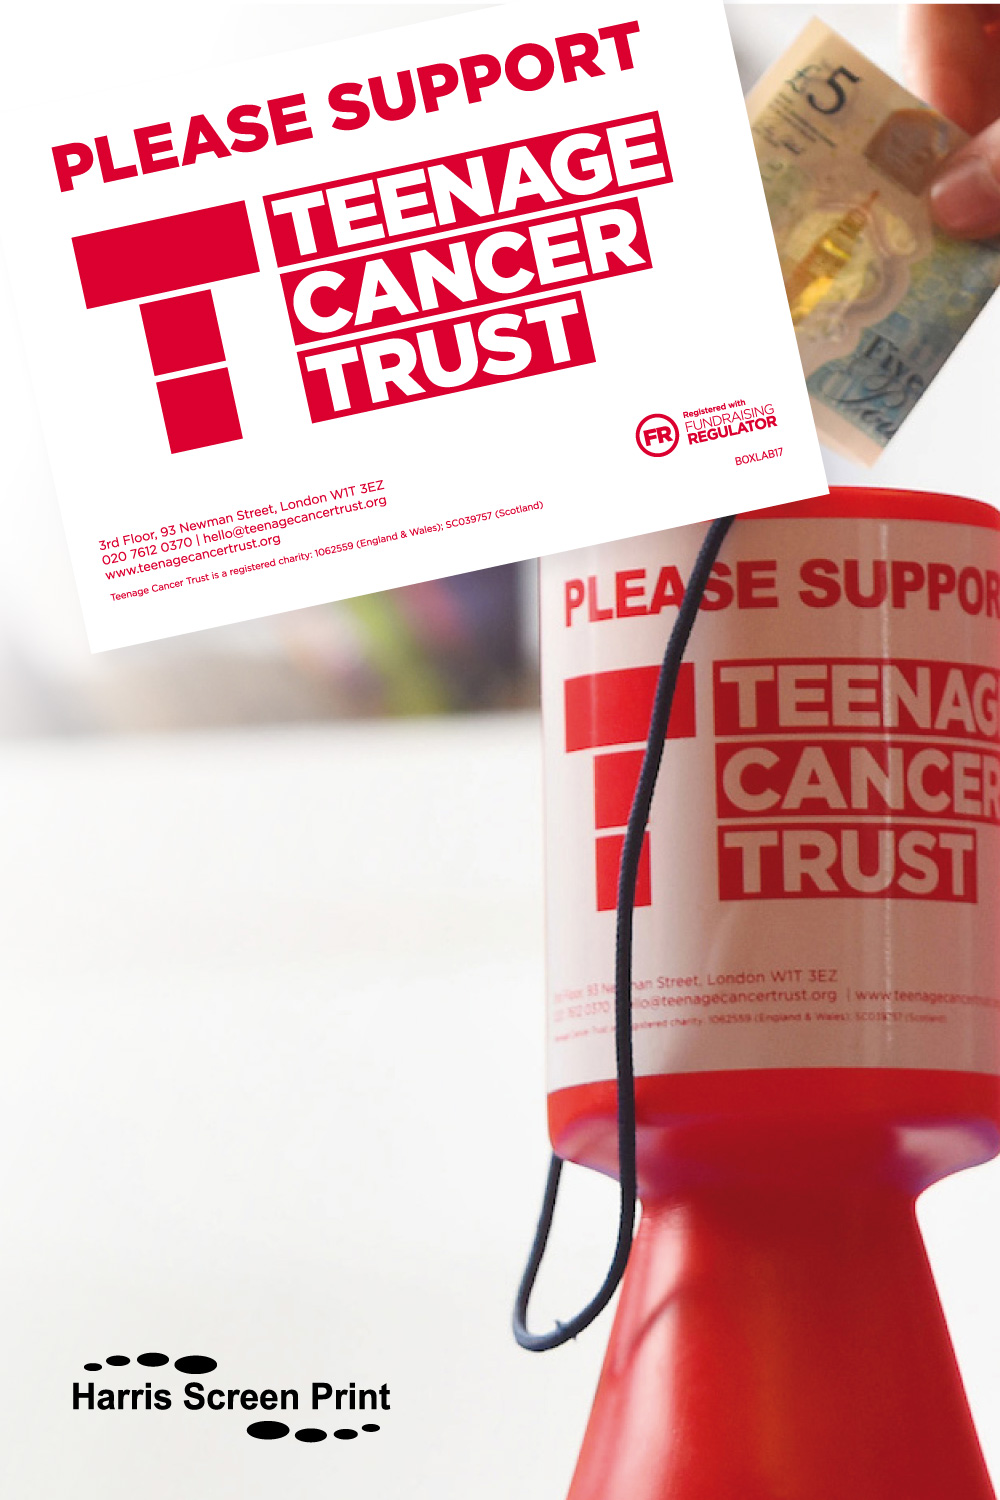 Teenage Cancer Trust collection tin stickers